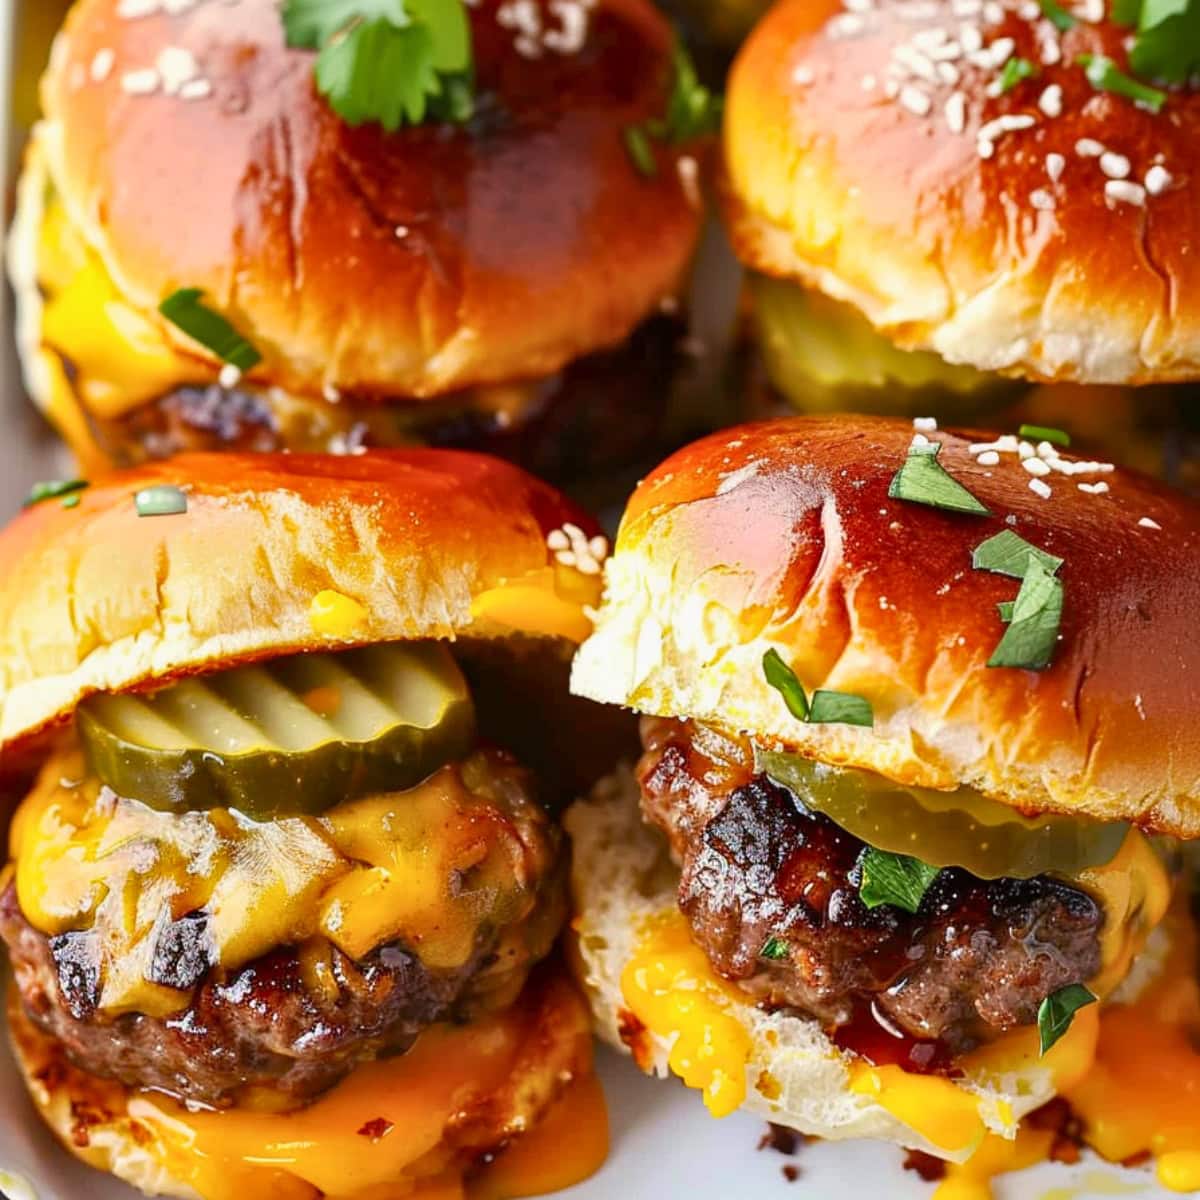 Bunch of cheesy cheese burger slides with melted cheese and pickles.